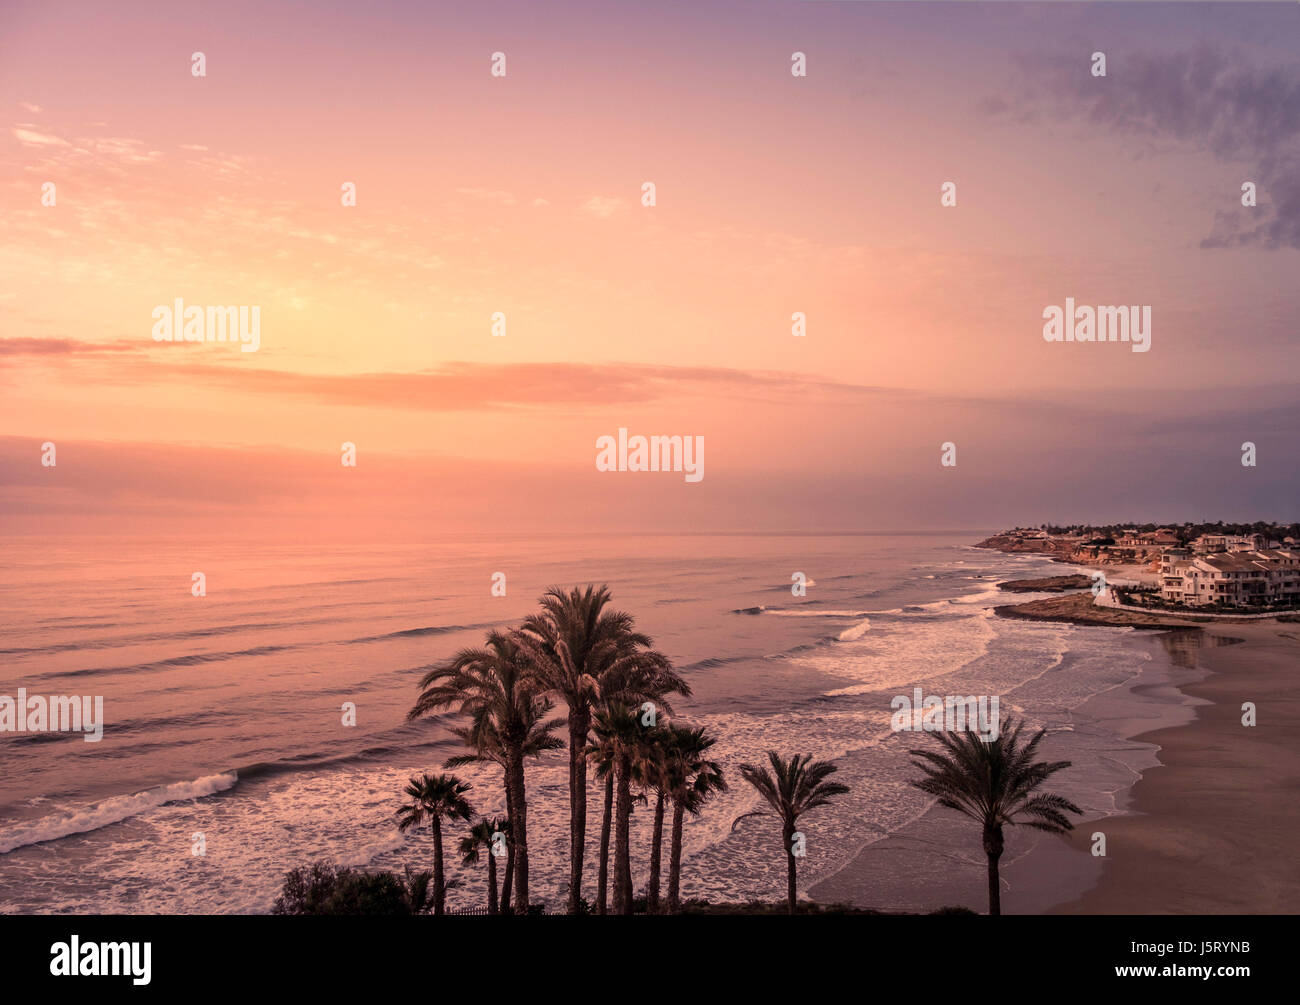 Palm trees by the ocean at sunrise, Spain Stock Photo